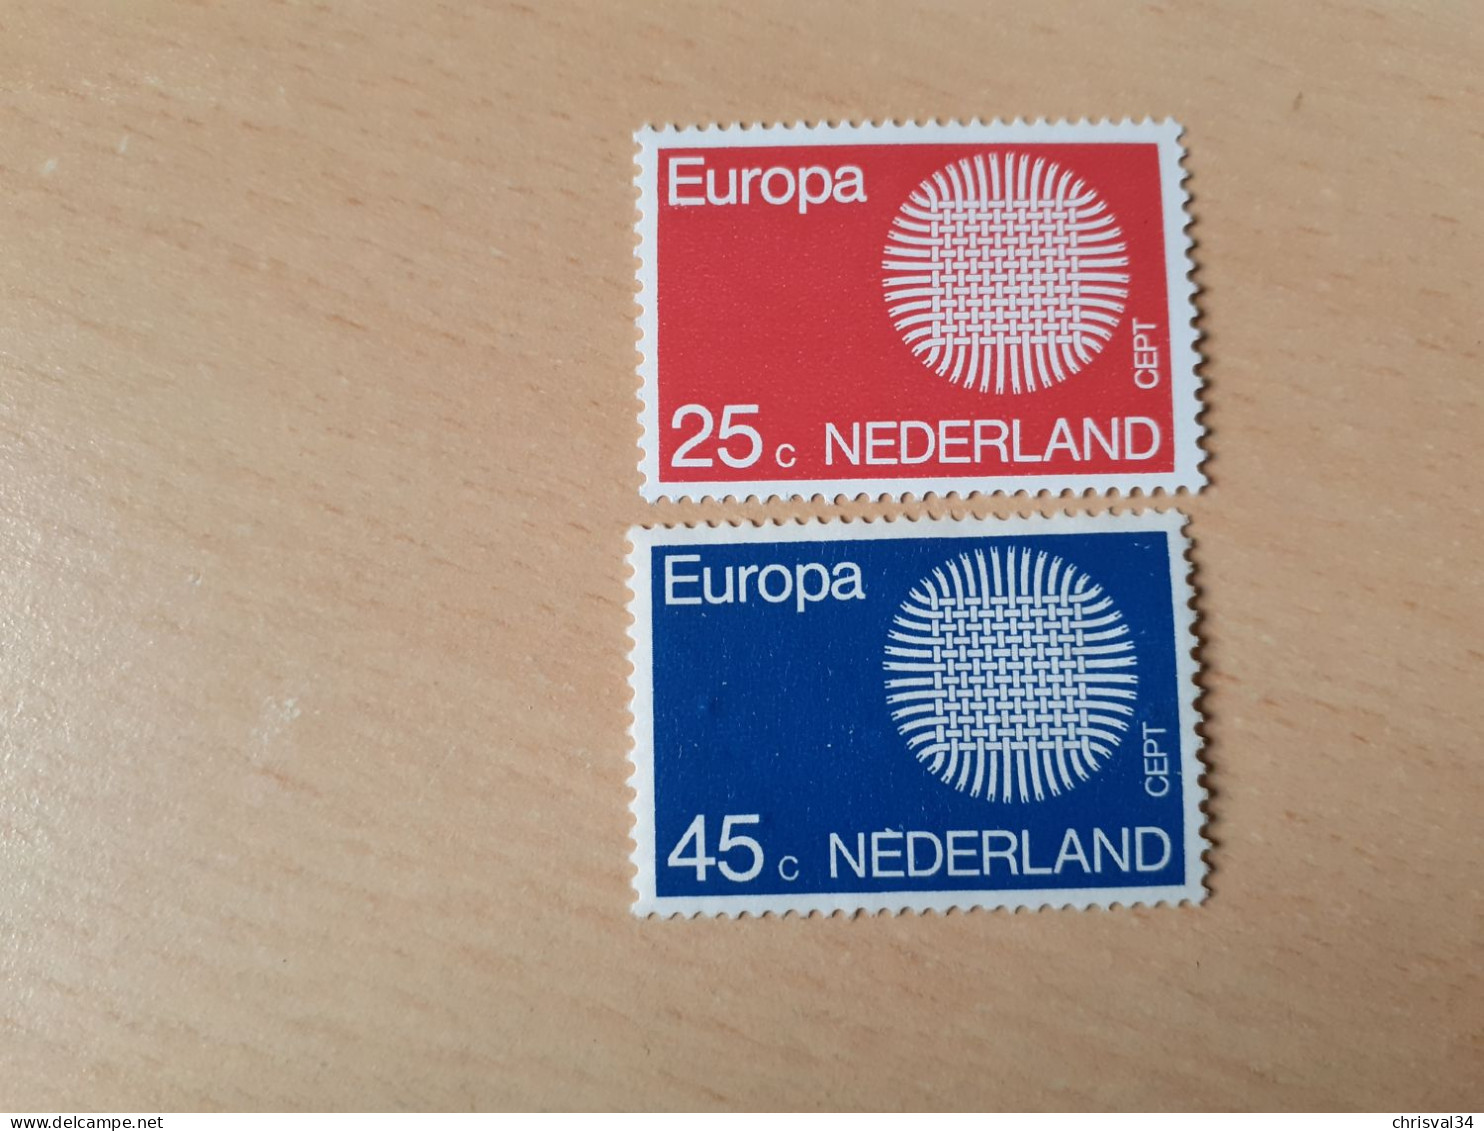 TIMBRES   PAYS-BAS    ANNÉE  1970      N  914  /  915   COTE  2,50  EUROS   NEUFS   LUXE** - Nuovi